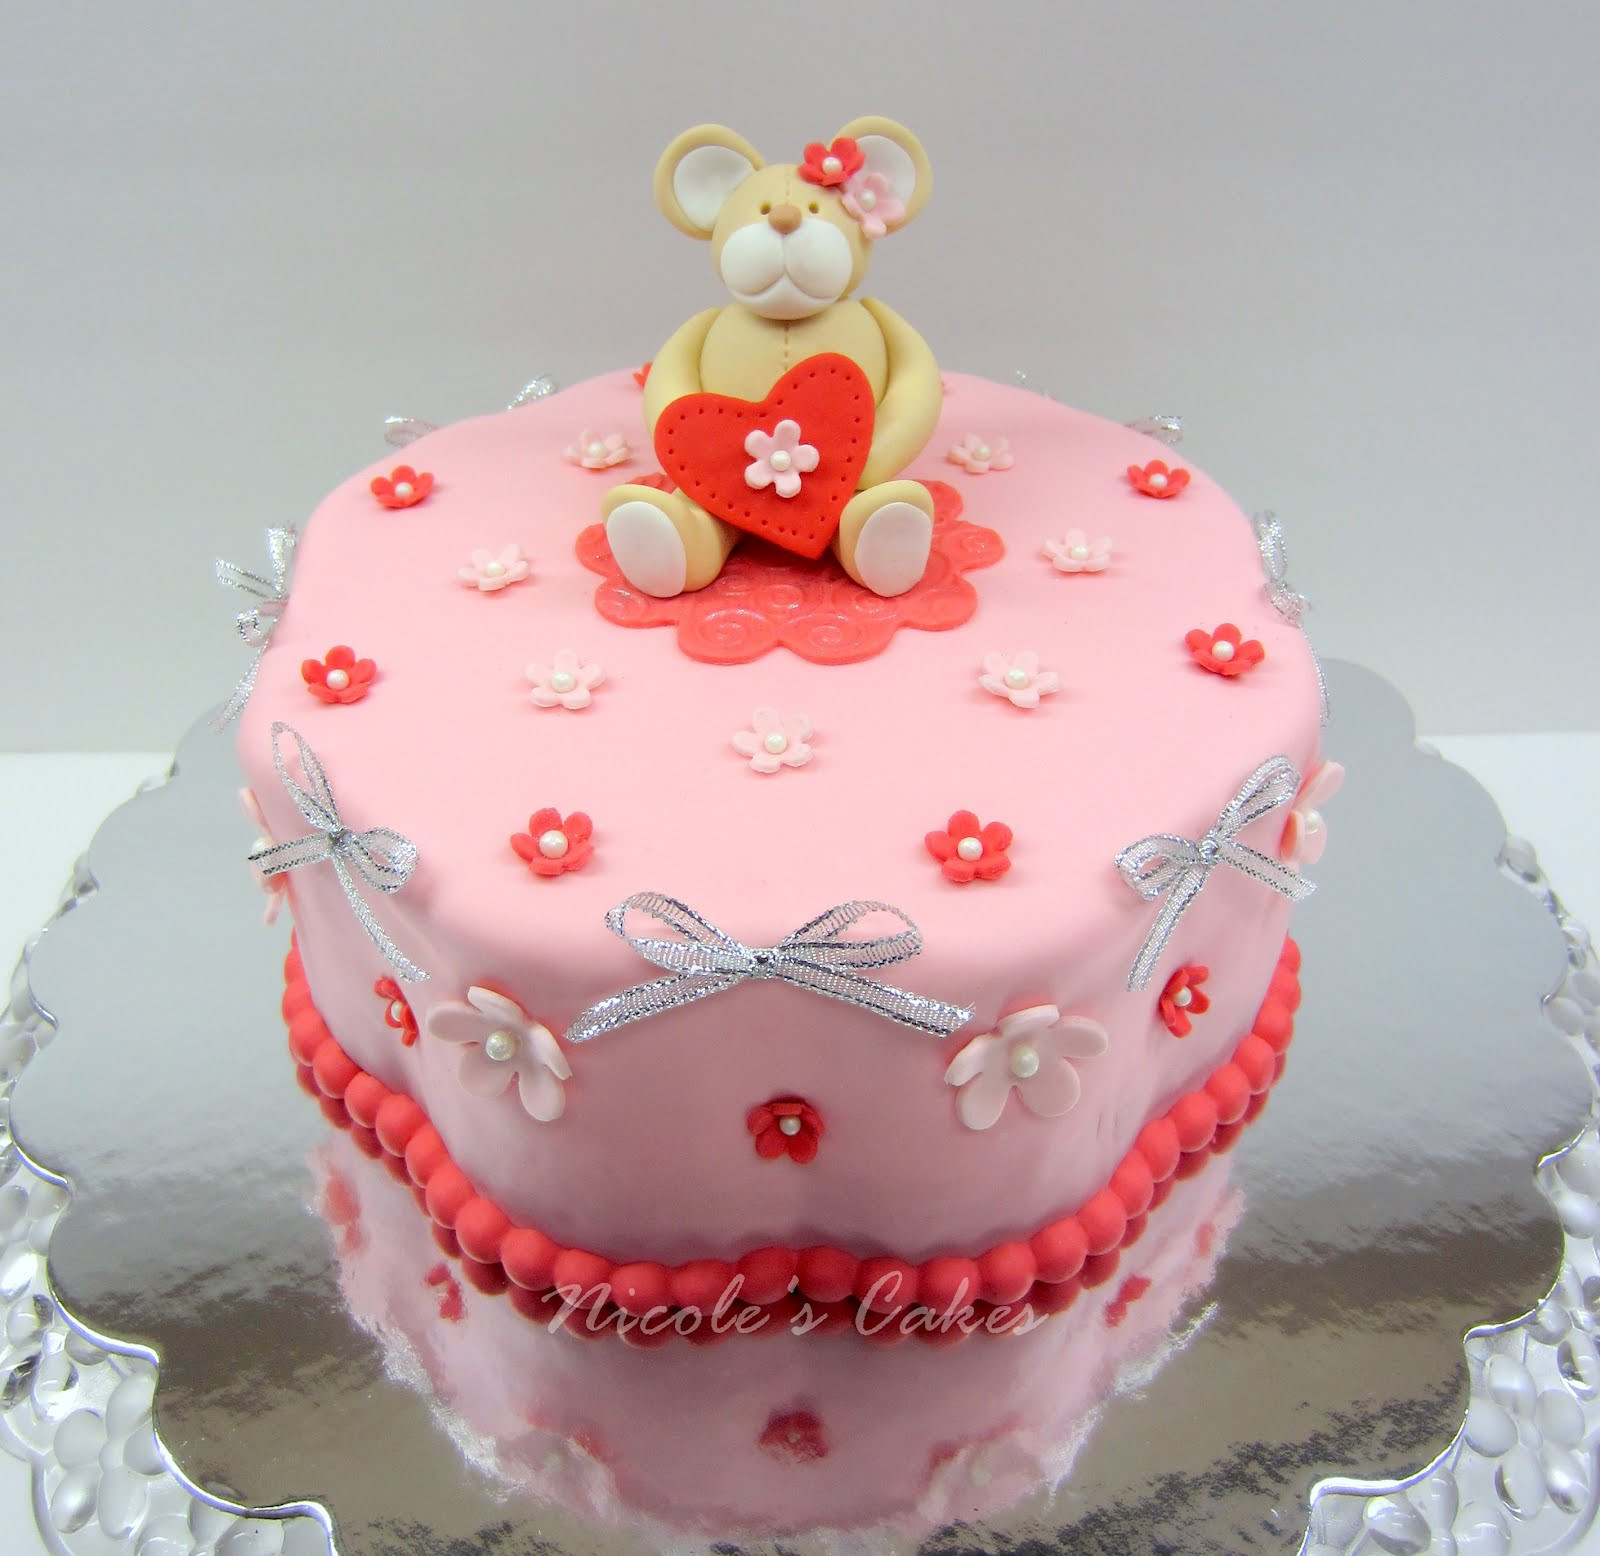 Pictures Of Birthday Cakes
 Confections Cakes & Creations A Valentine s Birthday Cake